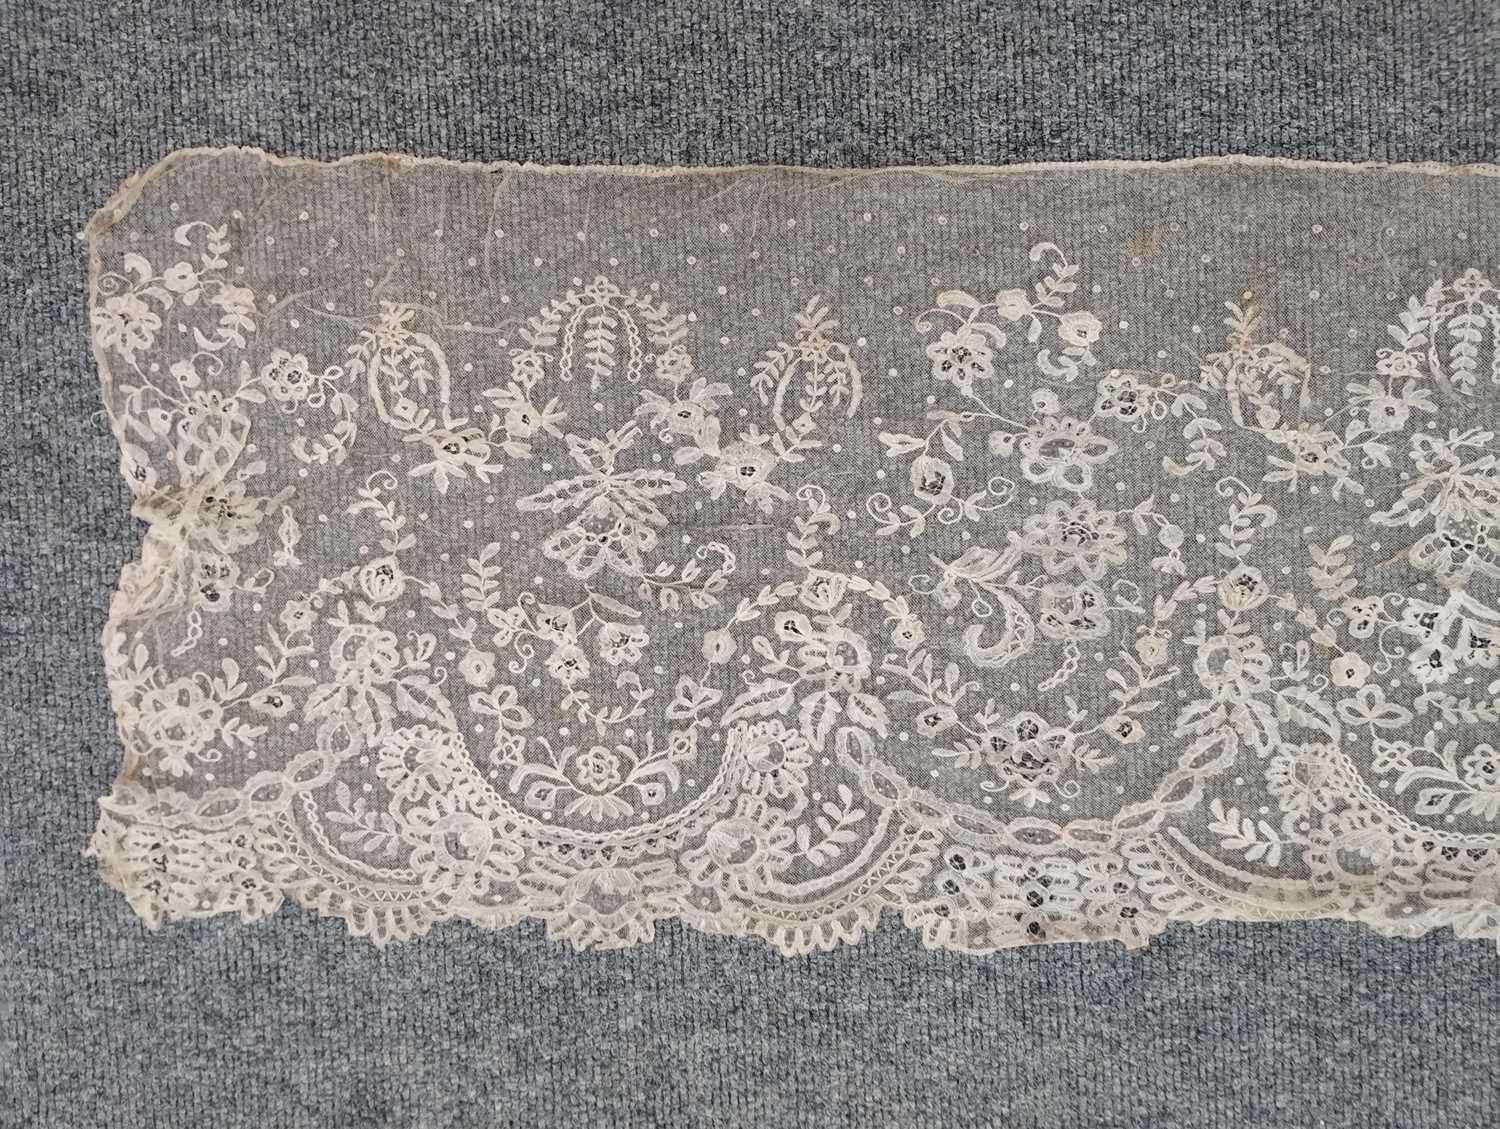 Early 20th Century Lace comprising a flounce with appliquéd flower heads and motifs within a - Image 23 of 32